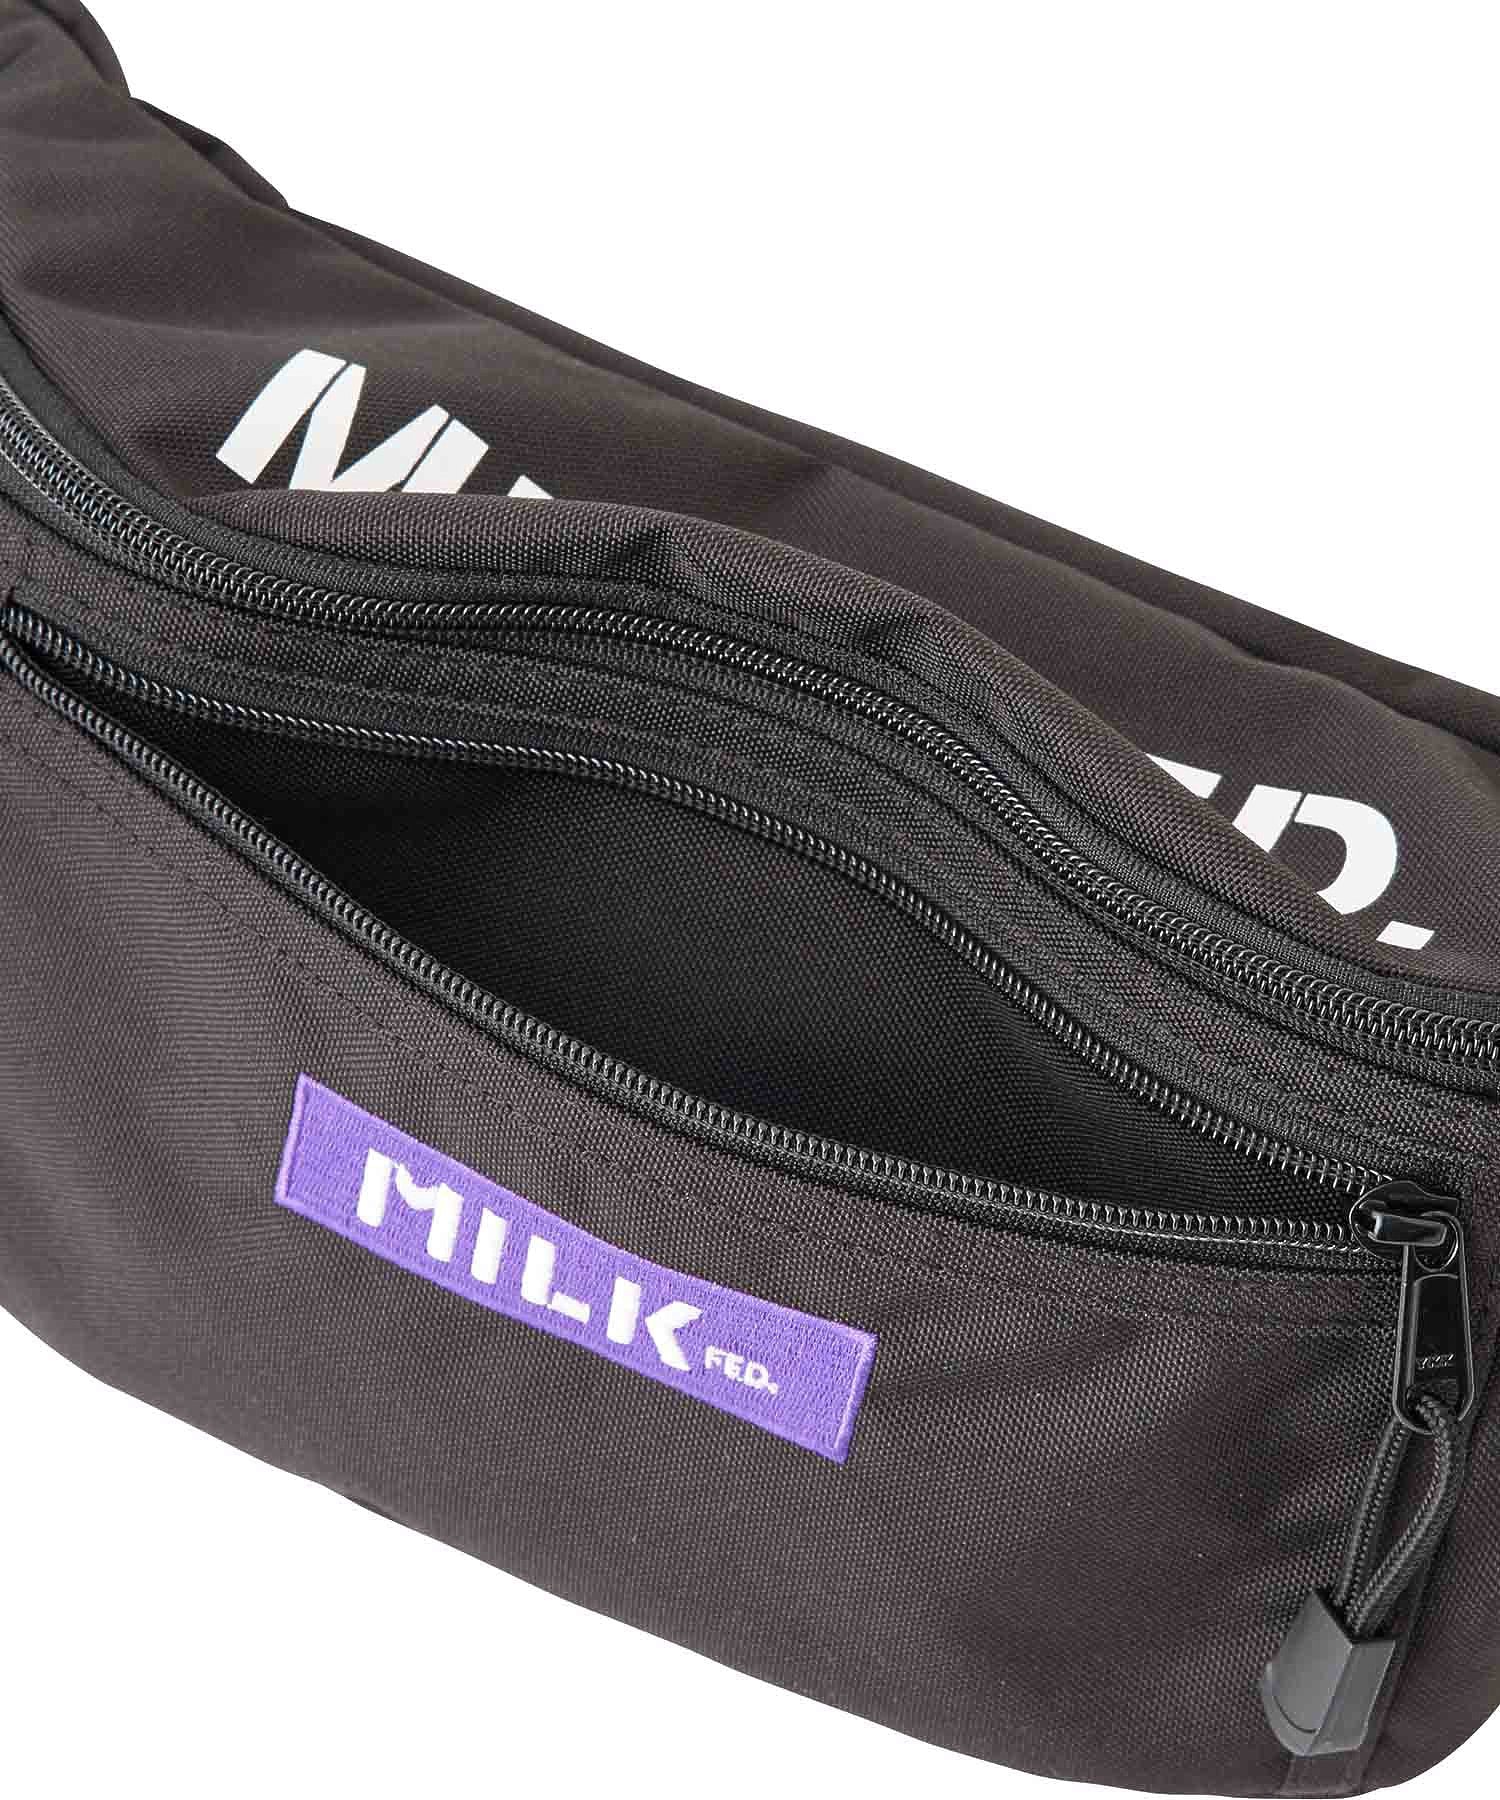 TOP LOGO FANNY PACK LIMITED PURPLE MILKFED.